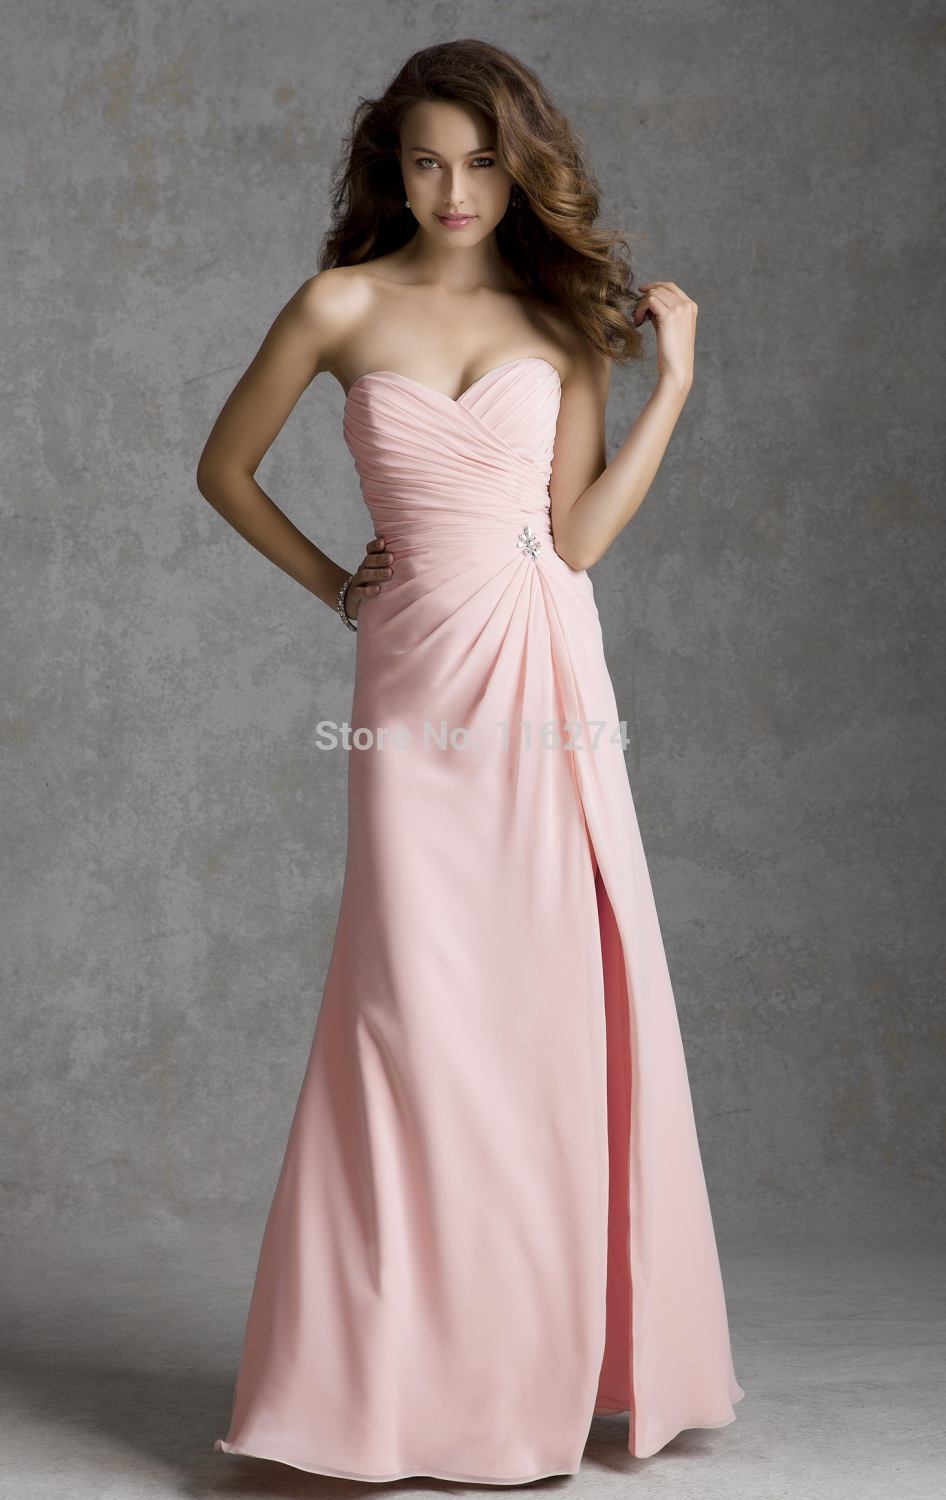 Create Your Own Bridesmaid Dress